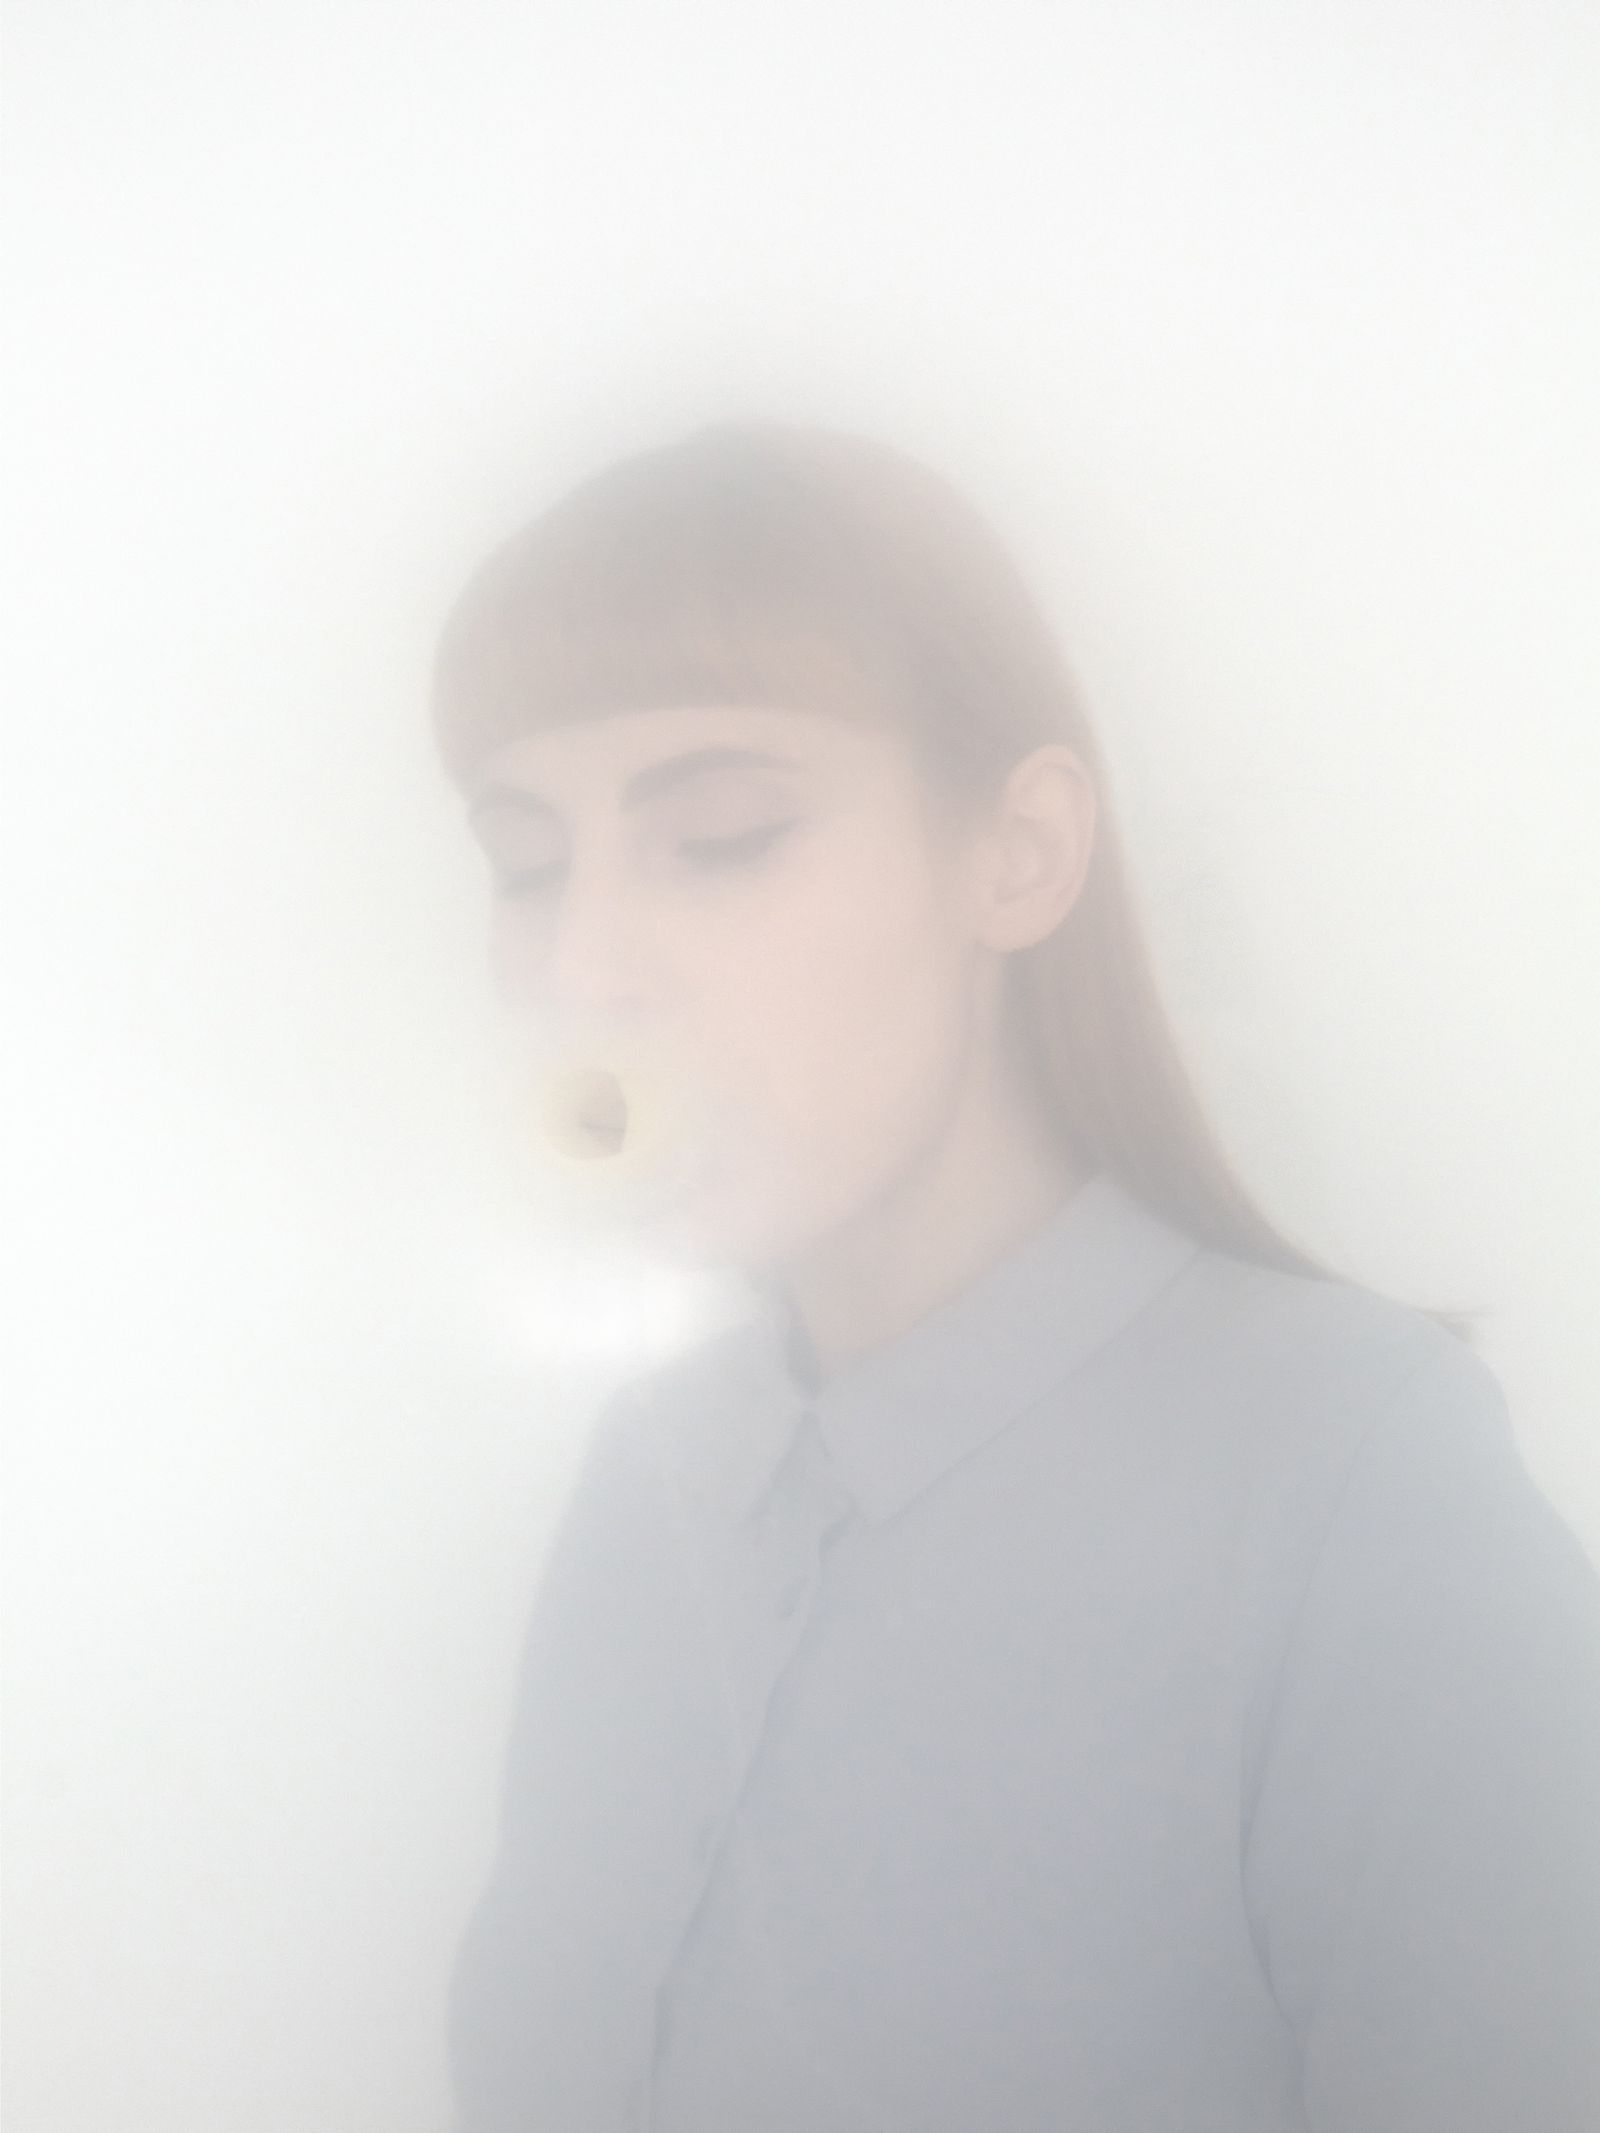 © Luisa Huebner - Image from the bubbles photography project